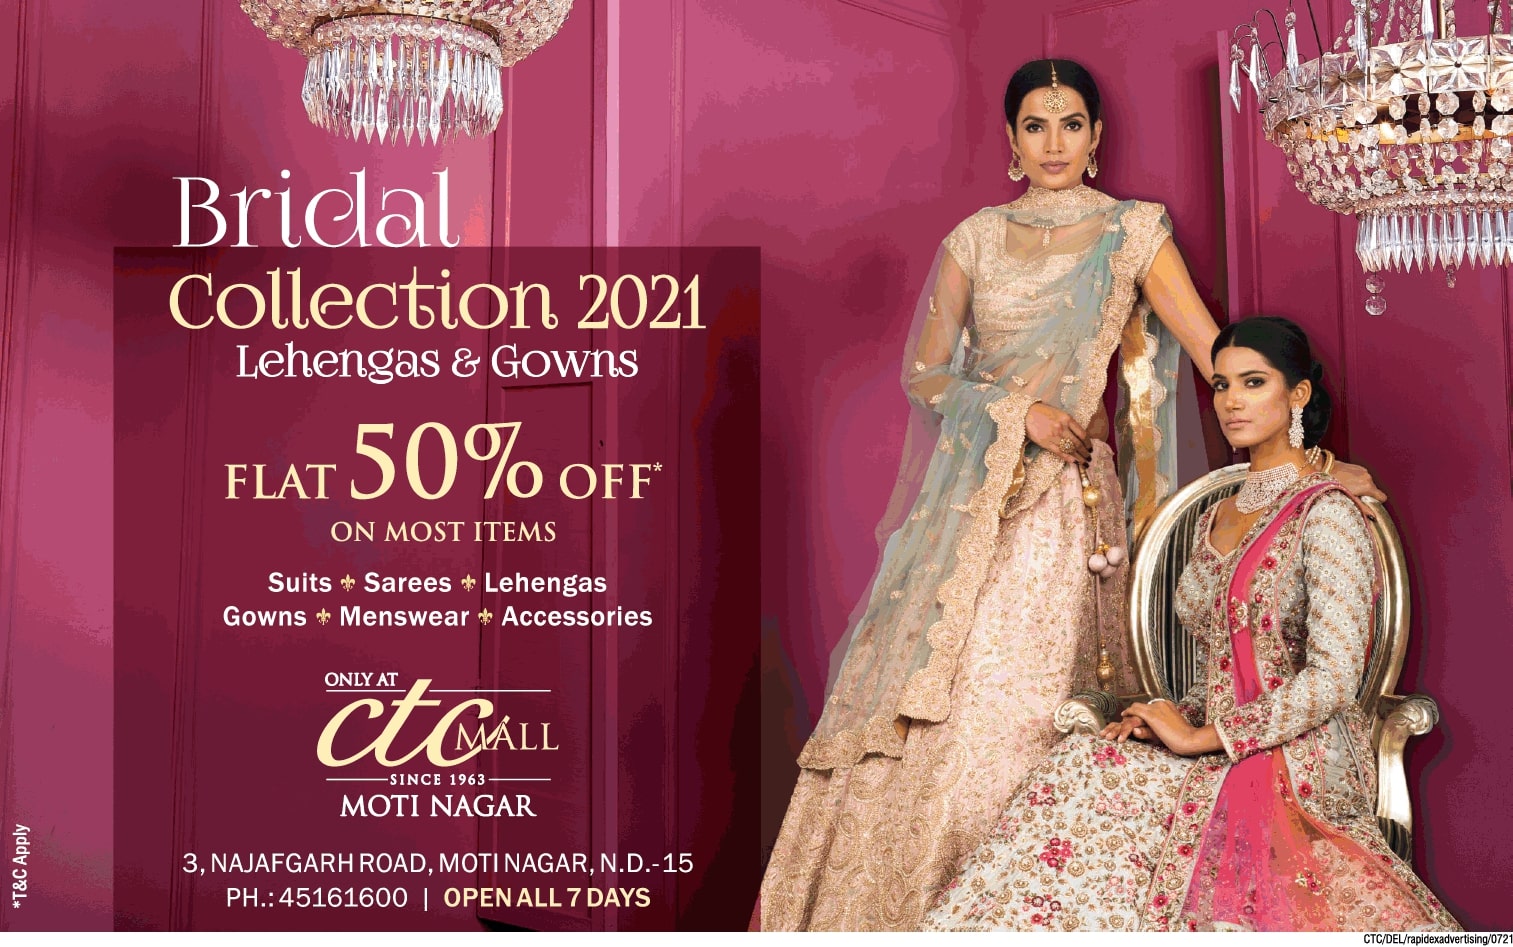 ctc-mall-bridal-collection-2021-lehengas-and-gowns-ad-delhi-times-03-07-2021